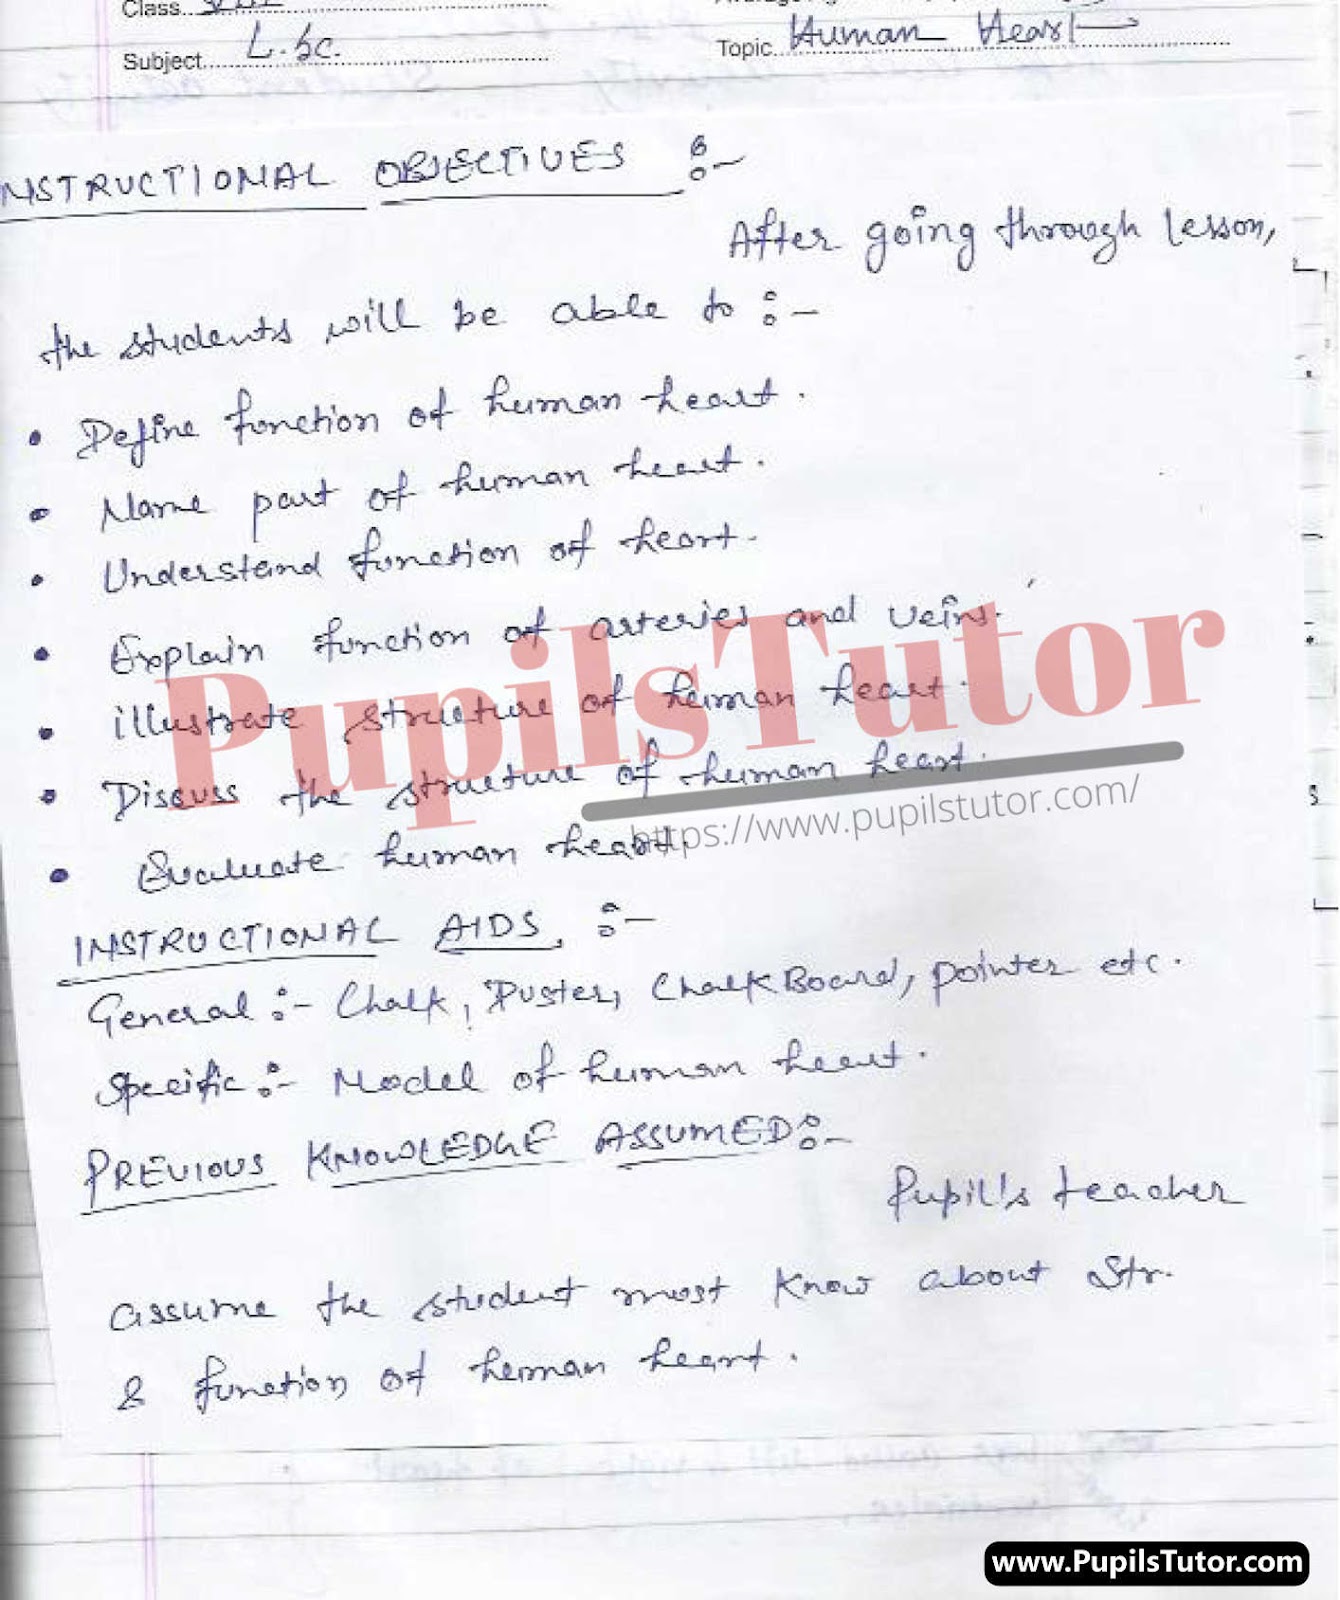 Biological Science Lesson Plan For Class 10 On Structure And Functions Of Human Heart – (Page And Image Number 1) – Pupils Tutor